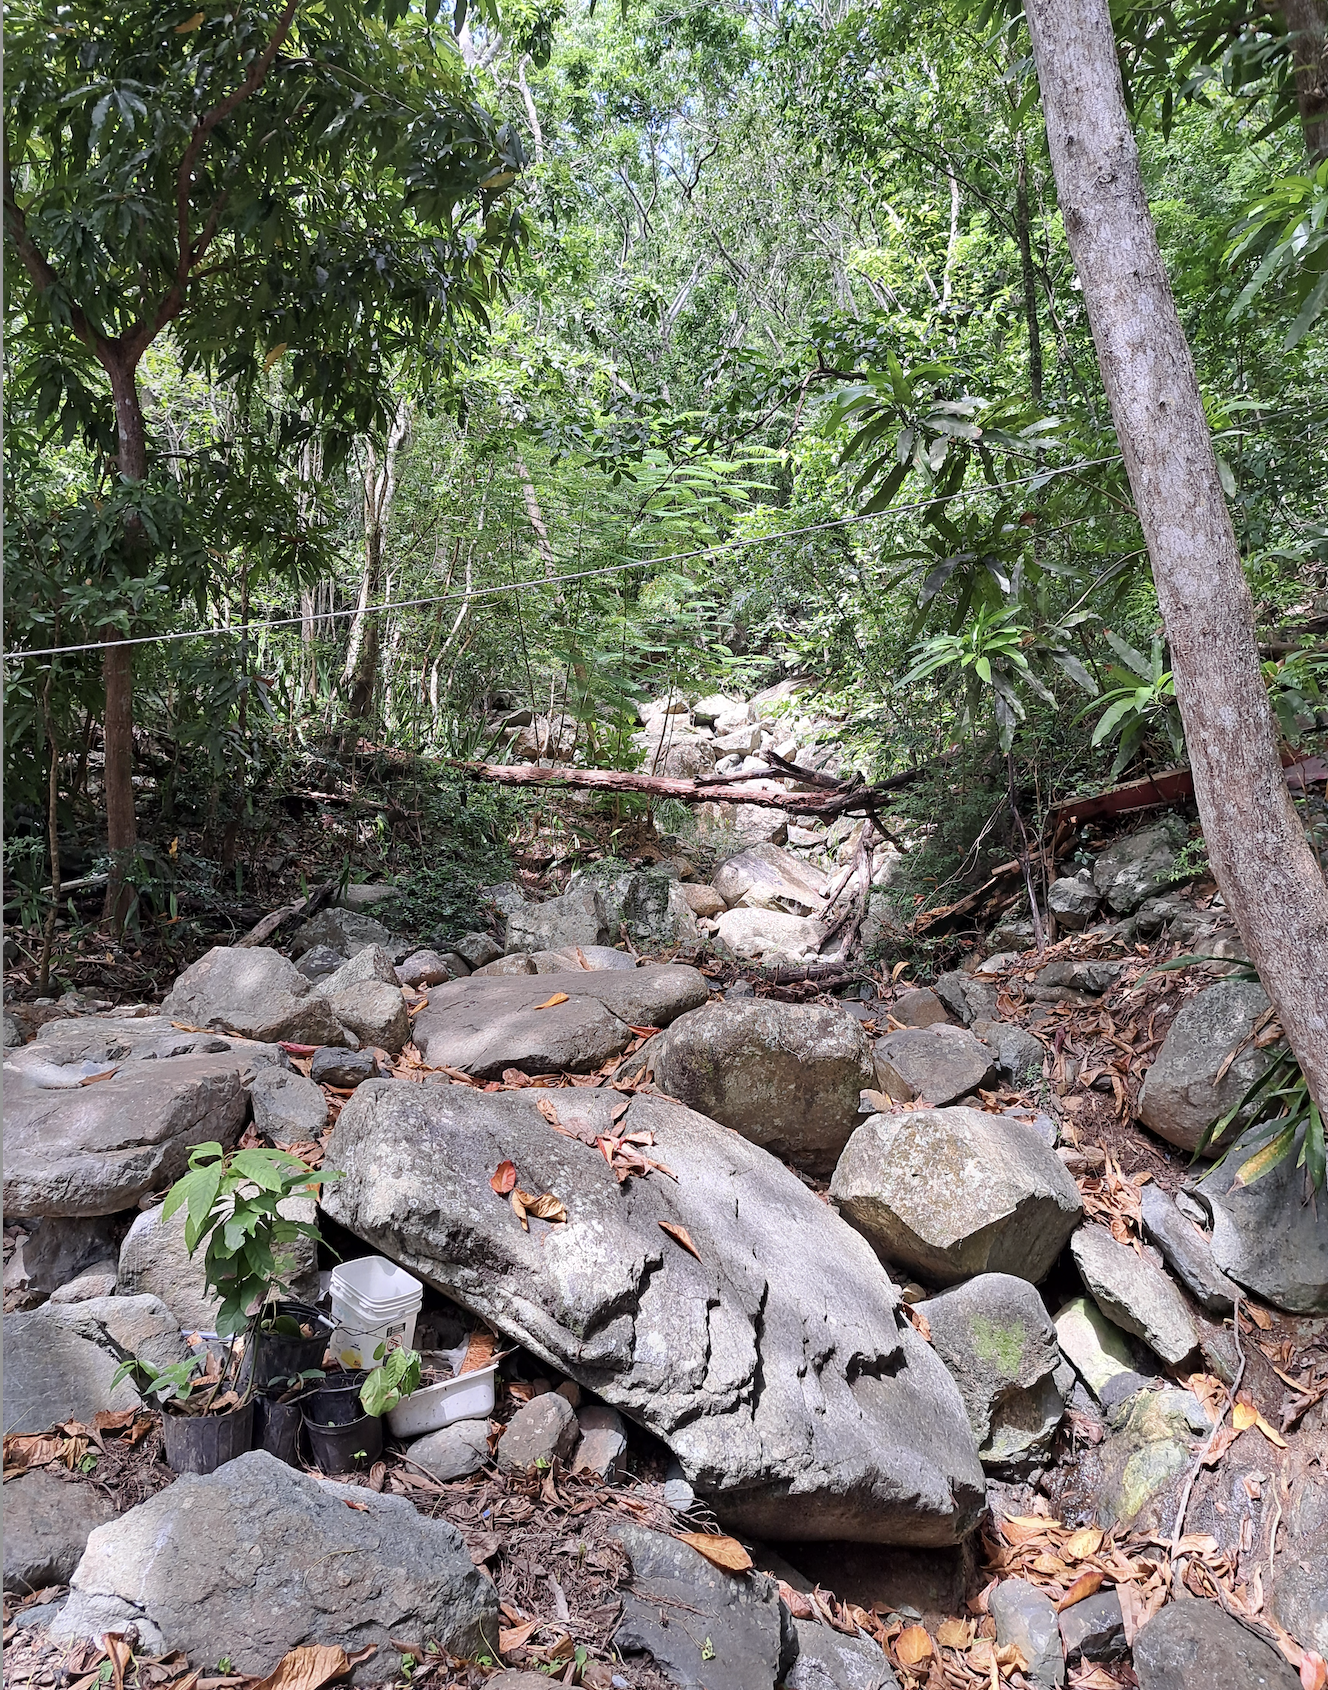 This stream runs down from St. Peter Mountain and drains into the Charlotte Amalie harbor. DeJongh’s gut was where women used to wash clothes. (Photo by Omar Davis)